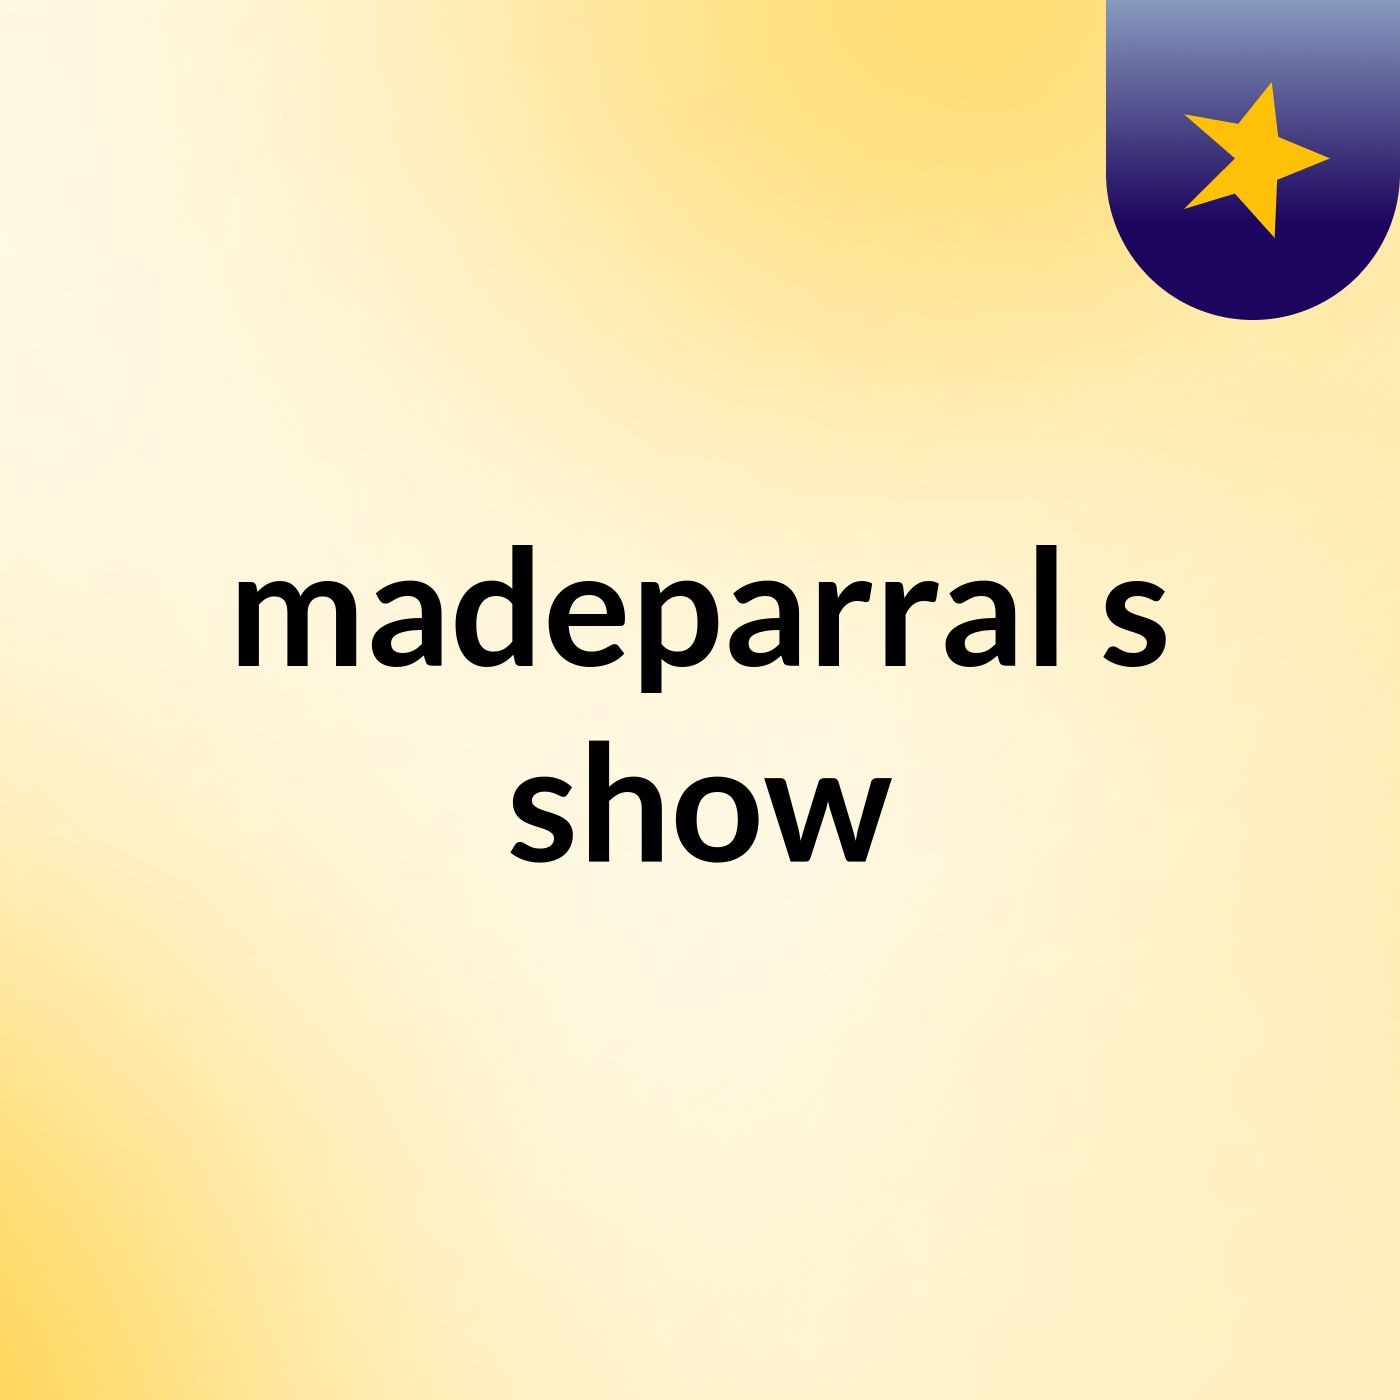 madeparral's show